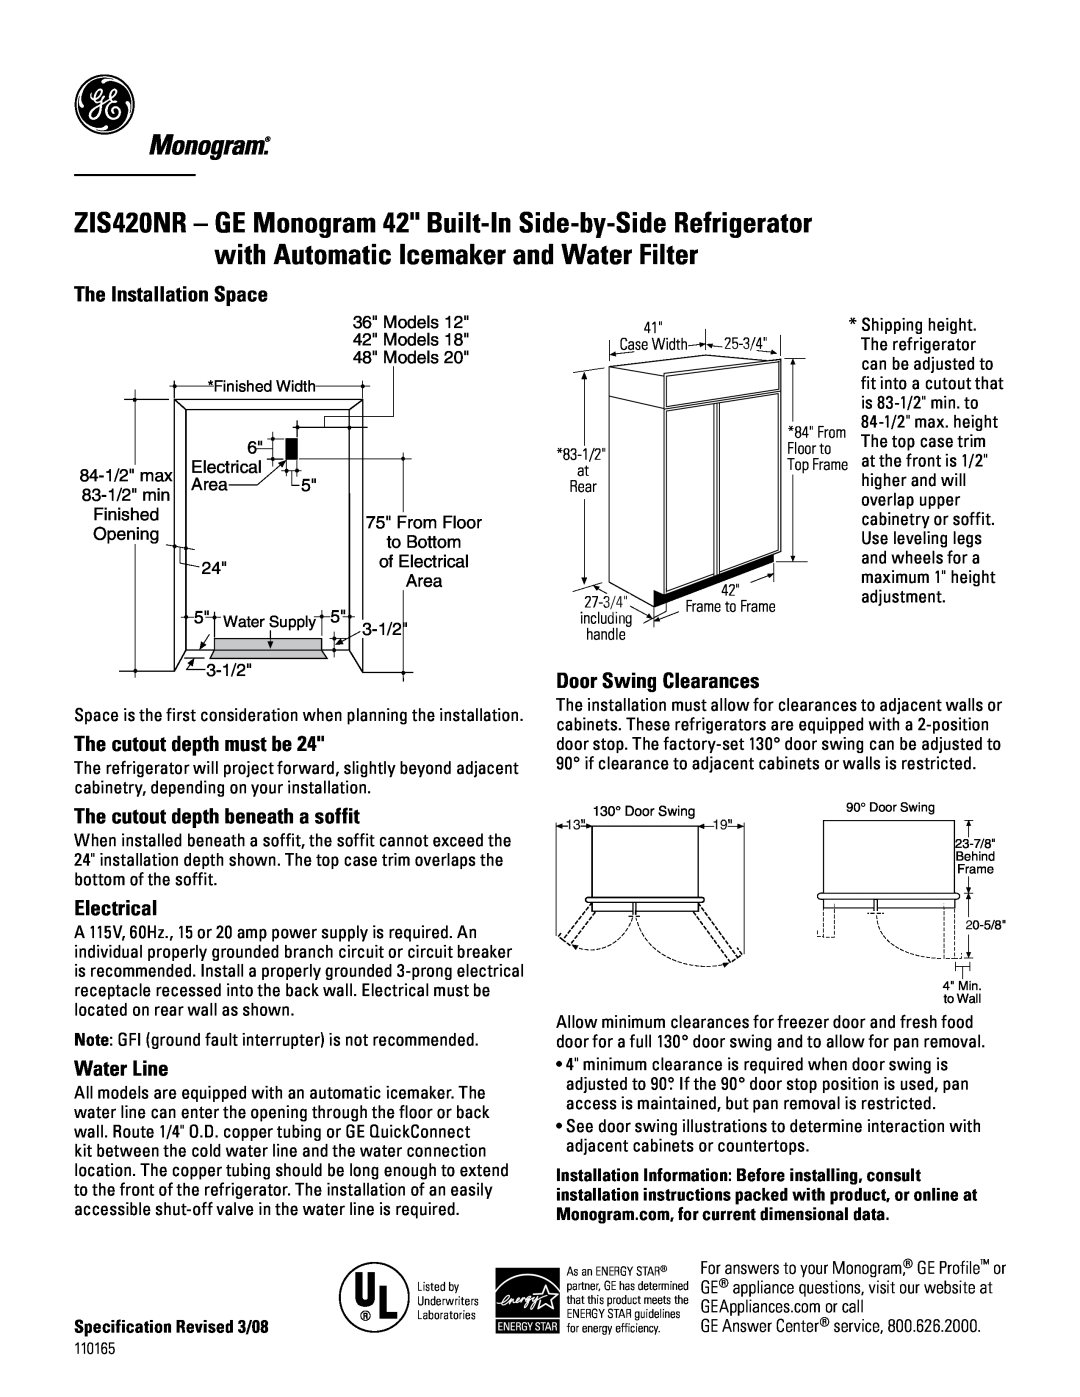 GE Monogram ZIS420NR installation instructions The Installation Space, The cutout depth must be, Door Swing Clearances 